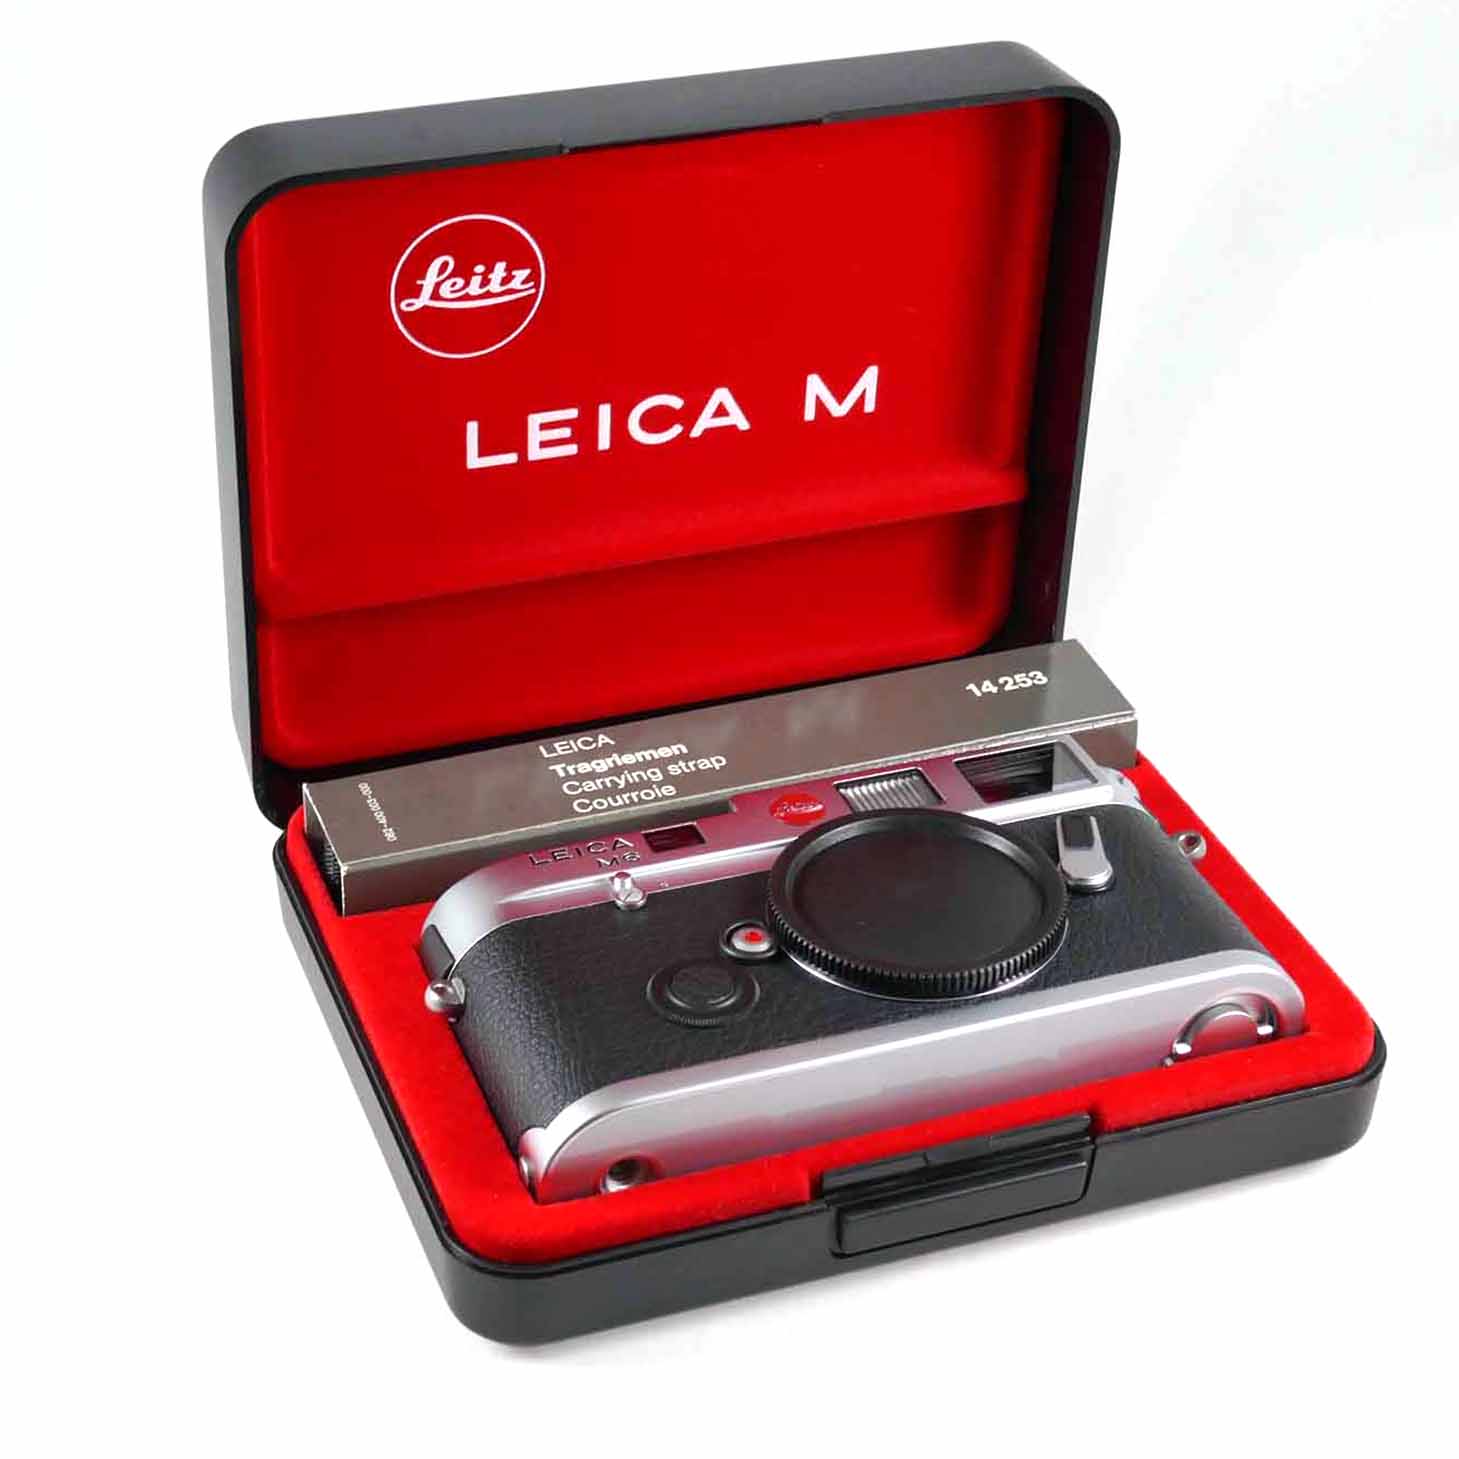 Leica M6 Siber Hegner Special Edition 125th Anniversary 122/125 10414